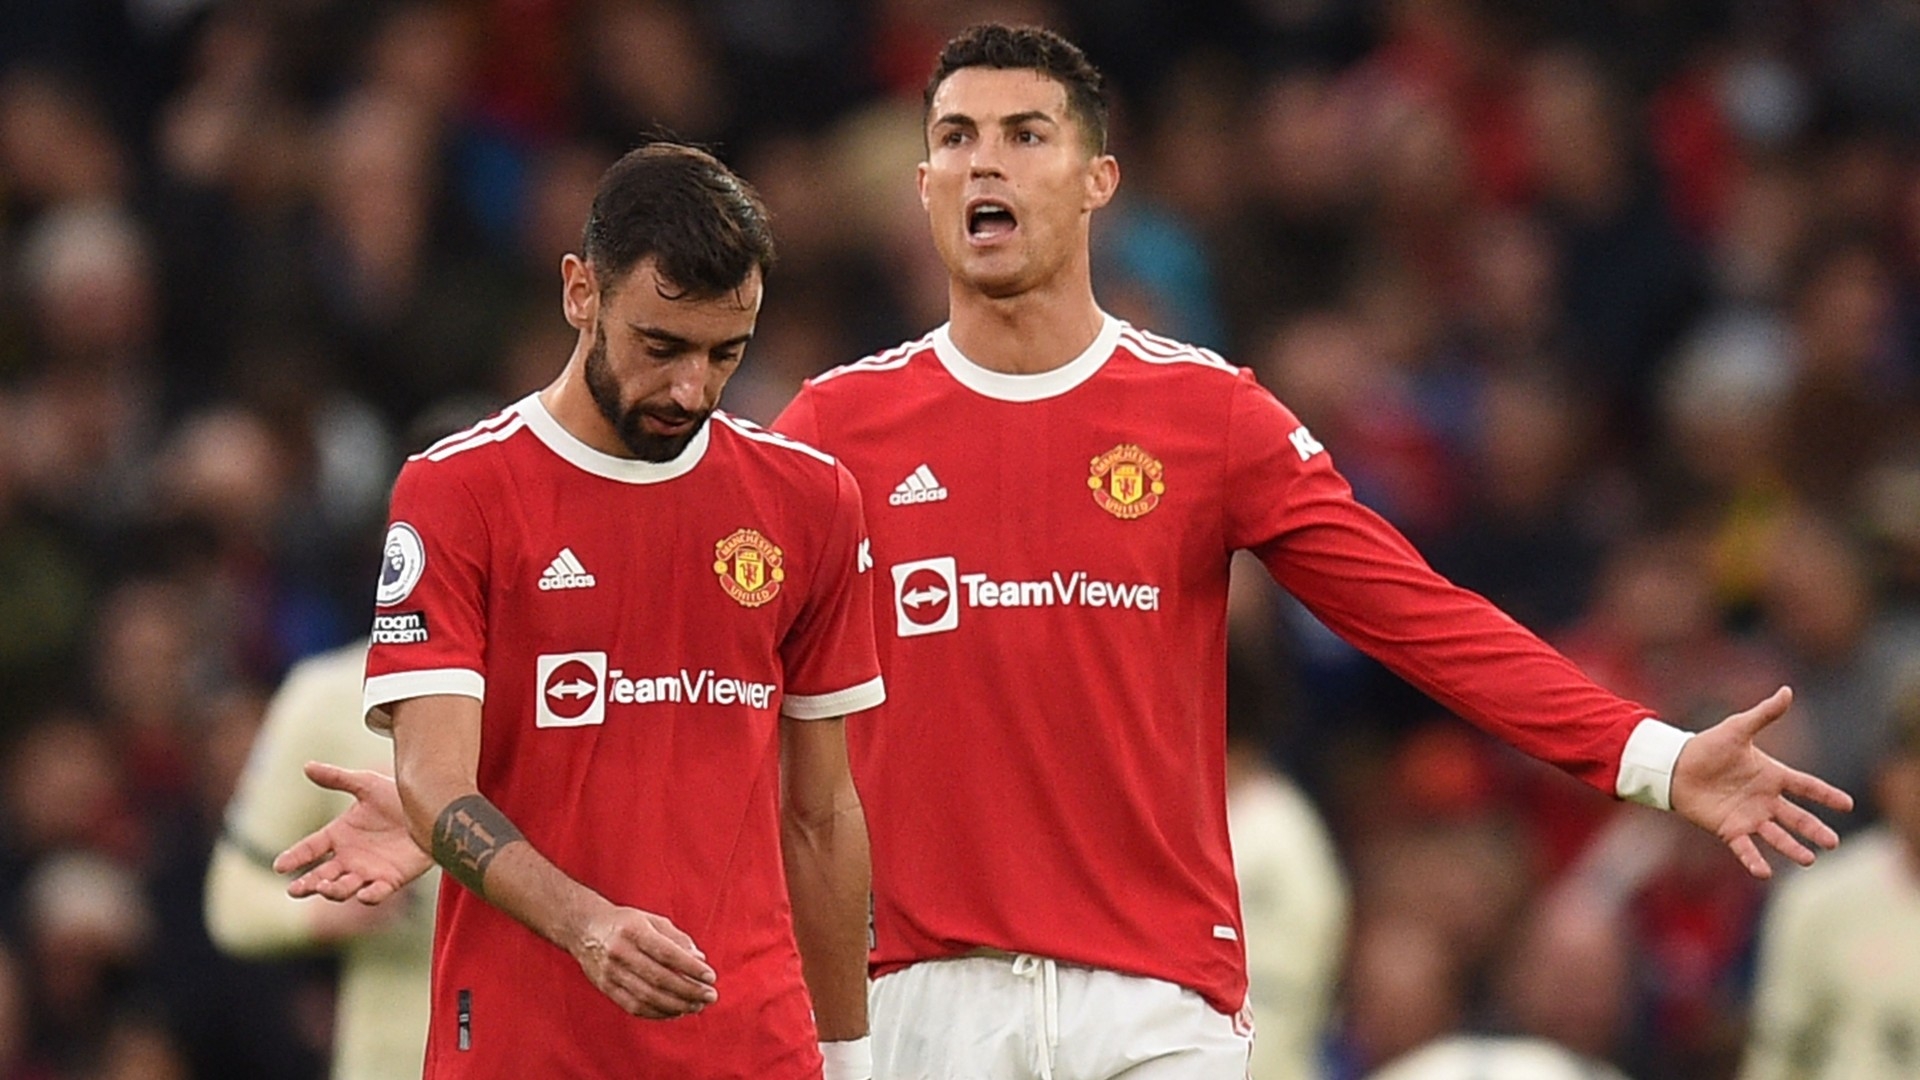 Manchester United hit 126-year low after Liverpool humiliation | Goal.com